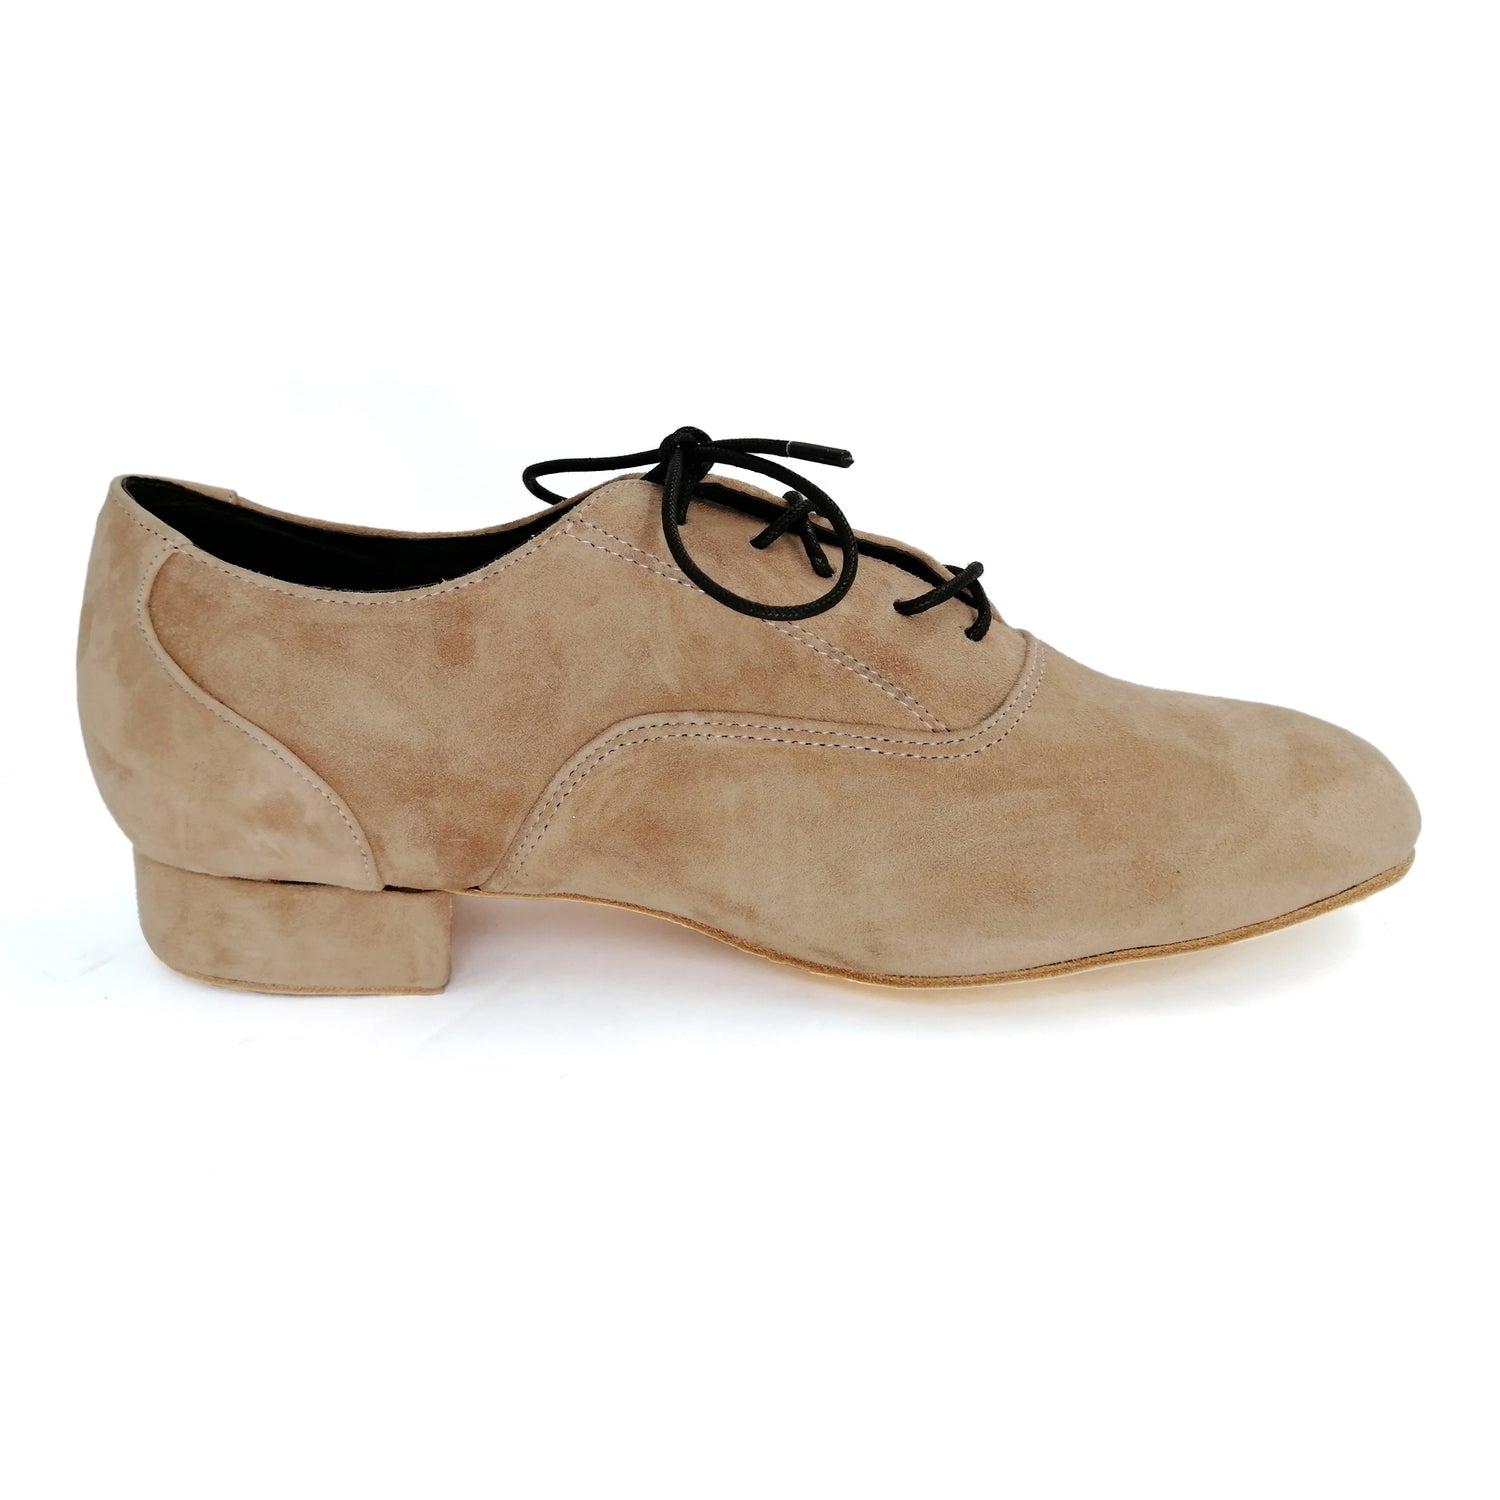 Men's Pro Dancer Tango Shoes with 1 inch Heel Leather Lace-up for Argentine Tango3